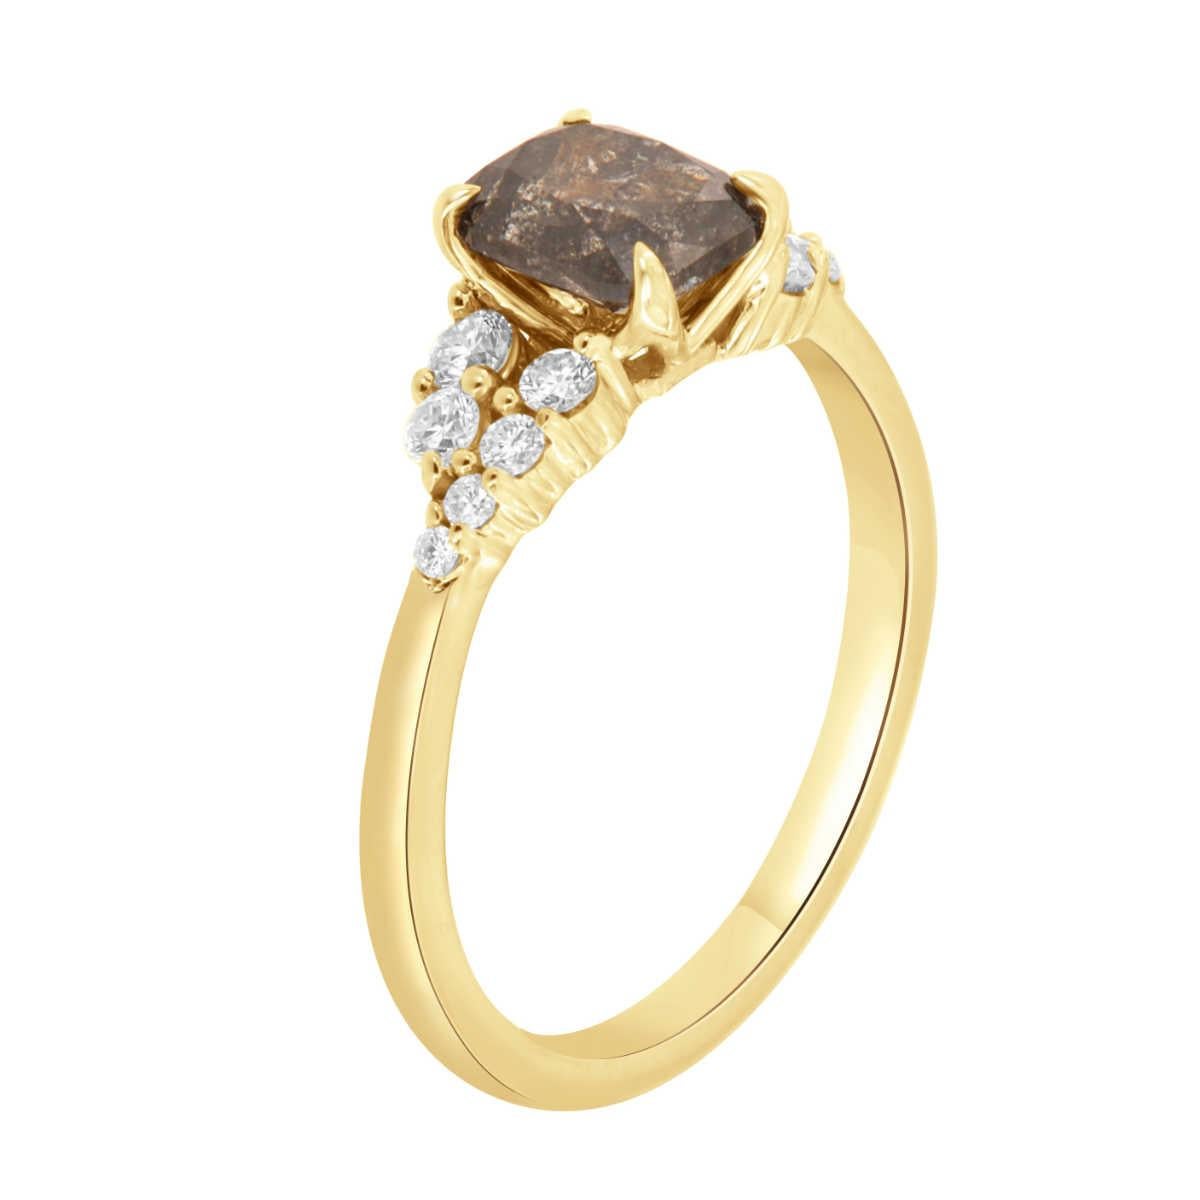 This 14k yellow gold organic & rustic style ring contains approximately Eight (8) Round diamonds with a total weight of 0.32 Carat. The round diamonds are G in color and Si1 in clarity, In the center of this petite Earthy style ring is set in four